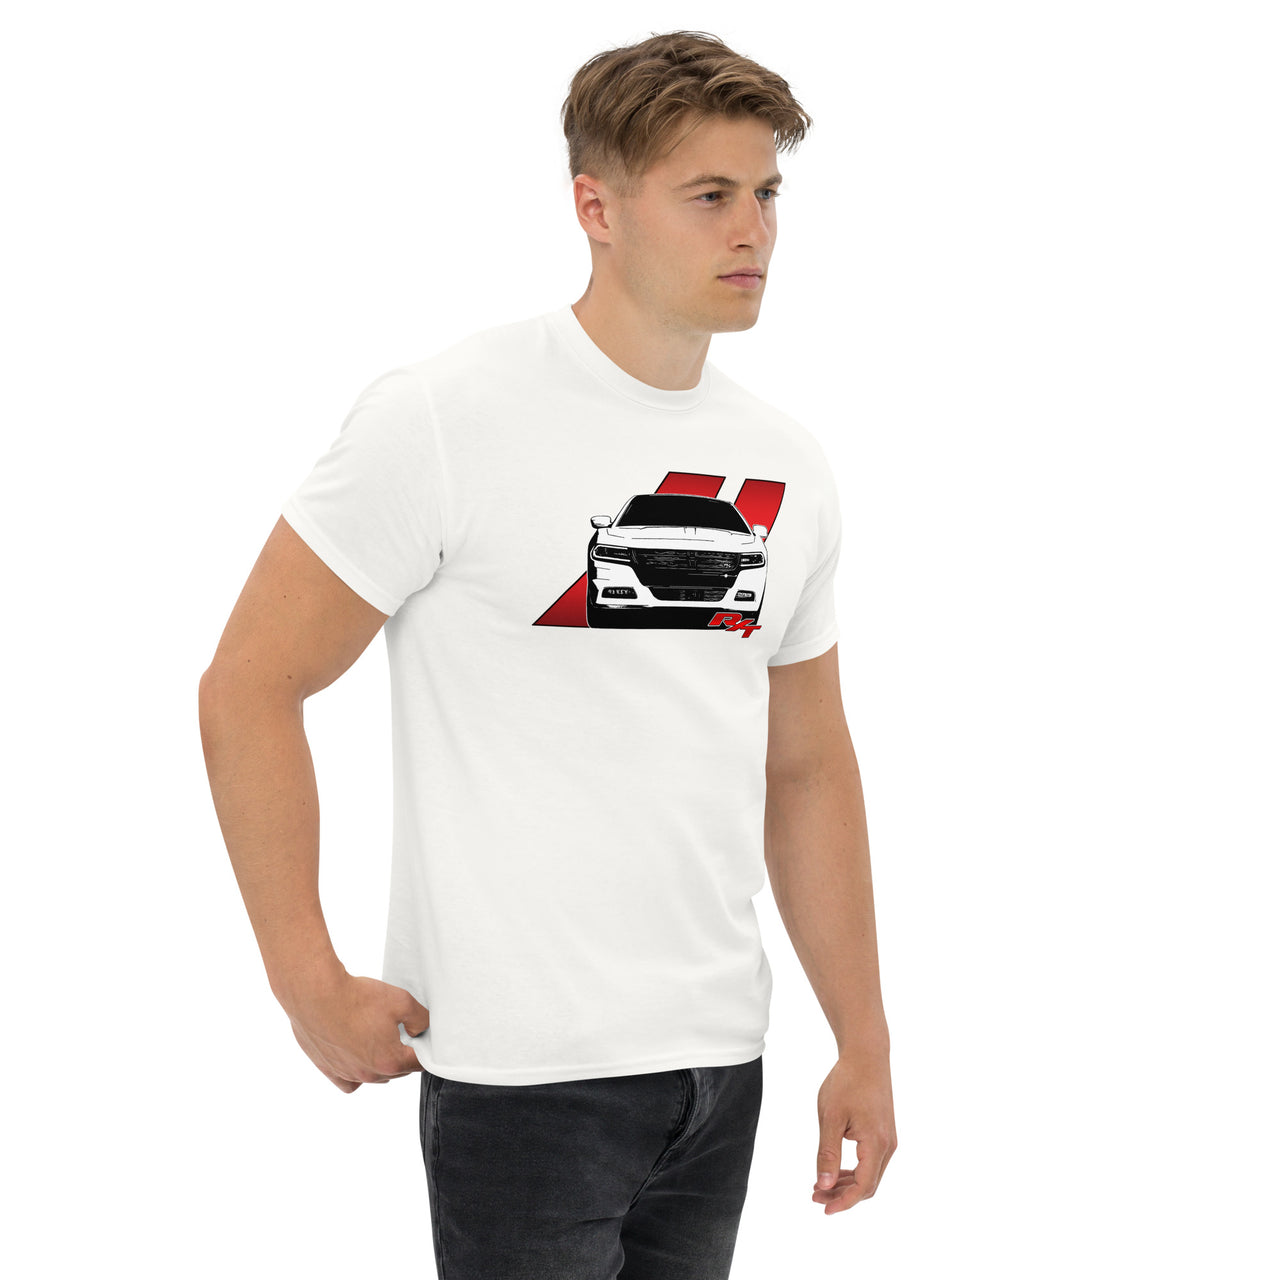 15-19 Charger R/T T-Shirt in white